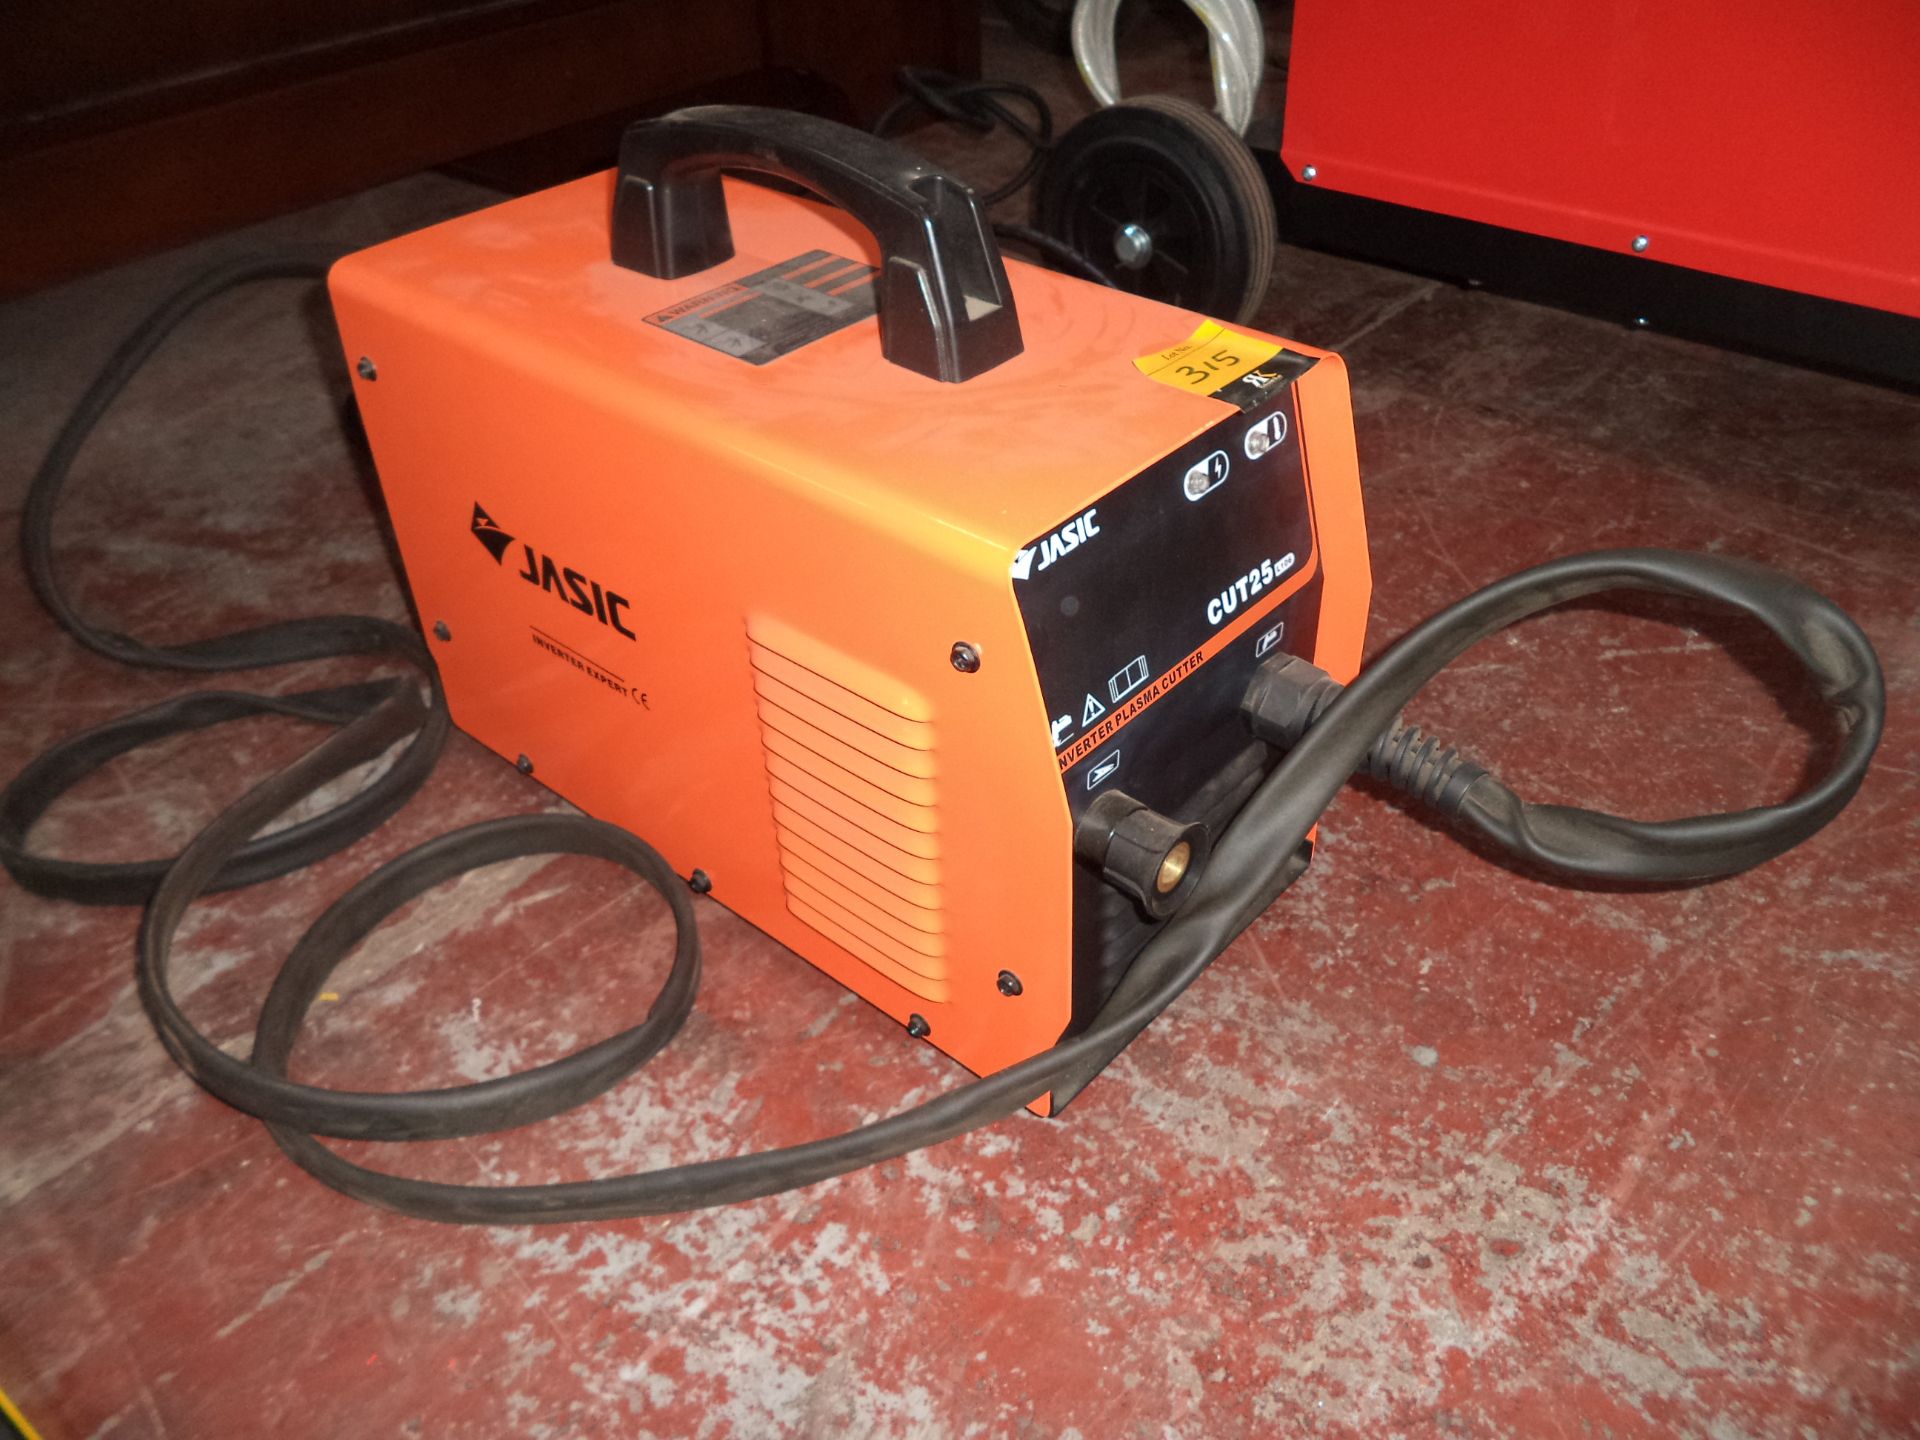 Jasic cut 25L106 plasma cutter IMPORTANT: Please remember goods successfully bid upon must be paid